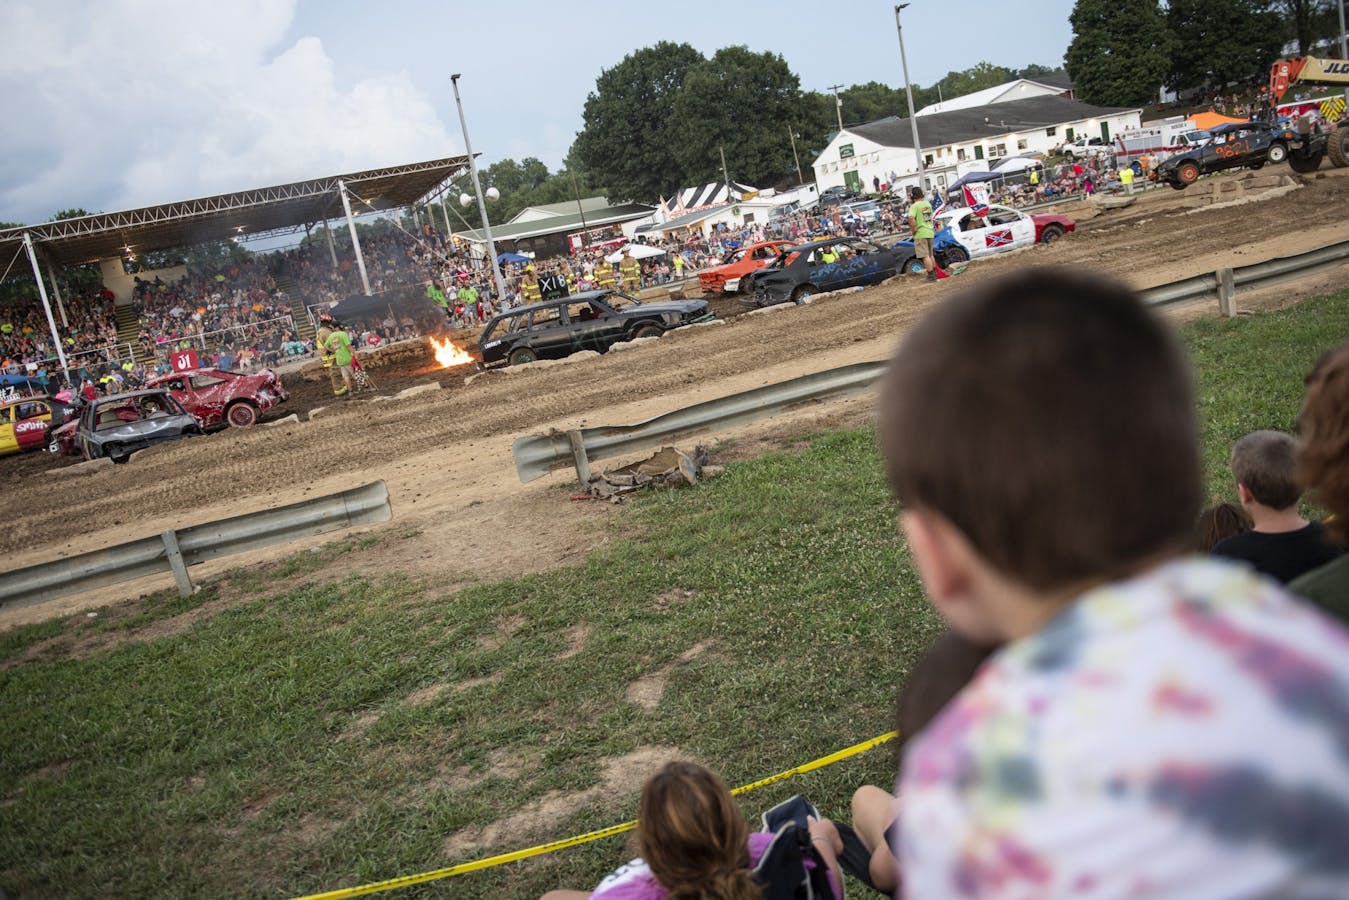 Athens County Fair emerges once again for Appalachian Ohio The Post